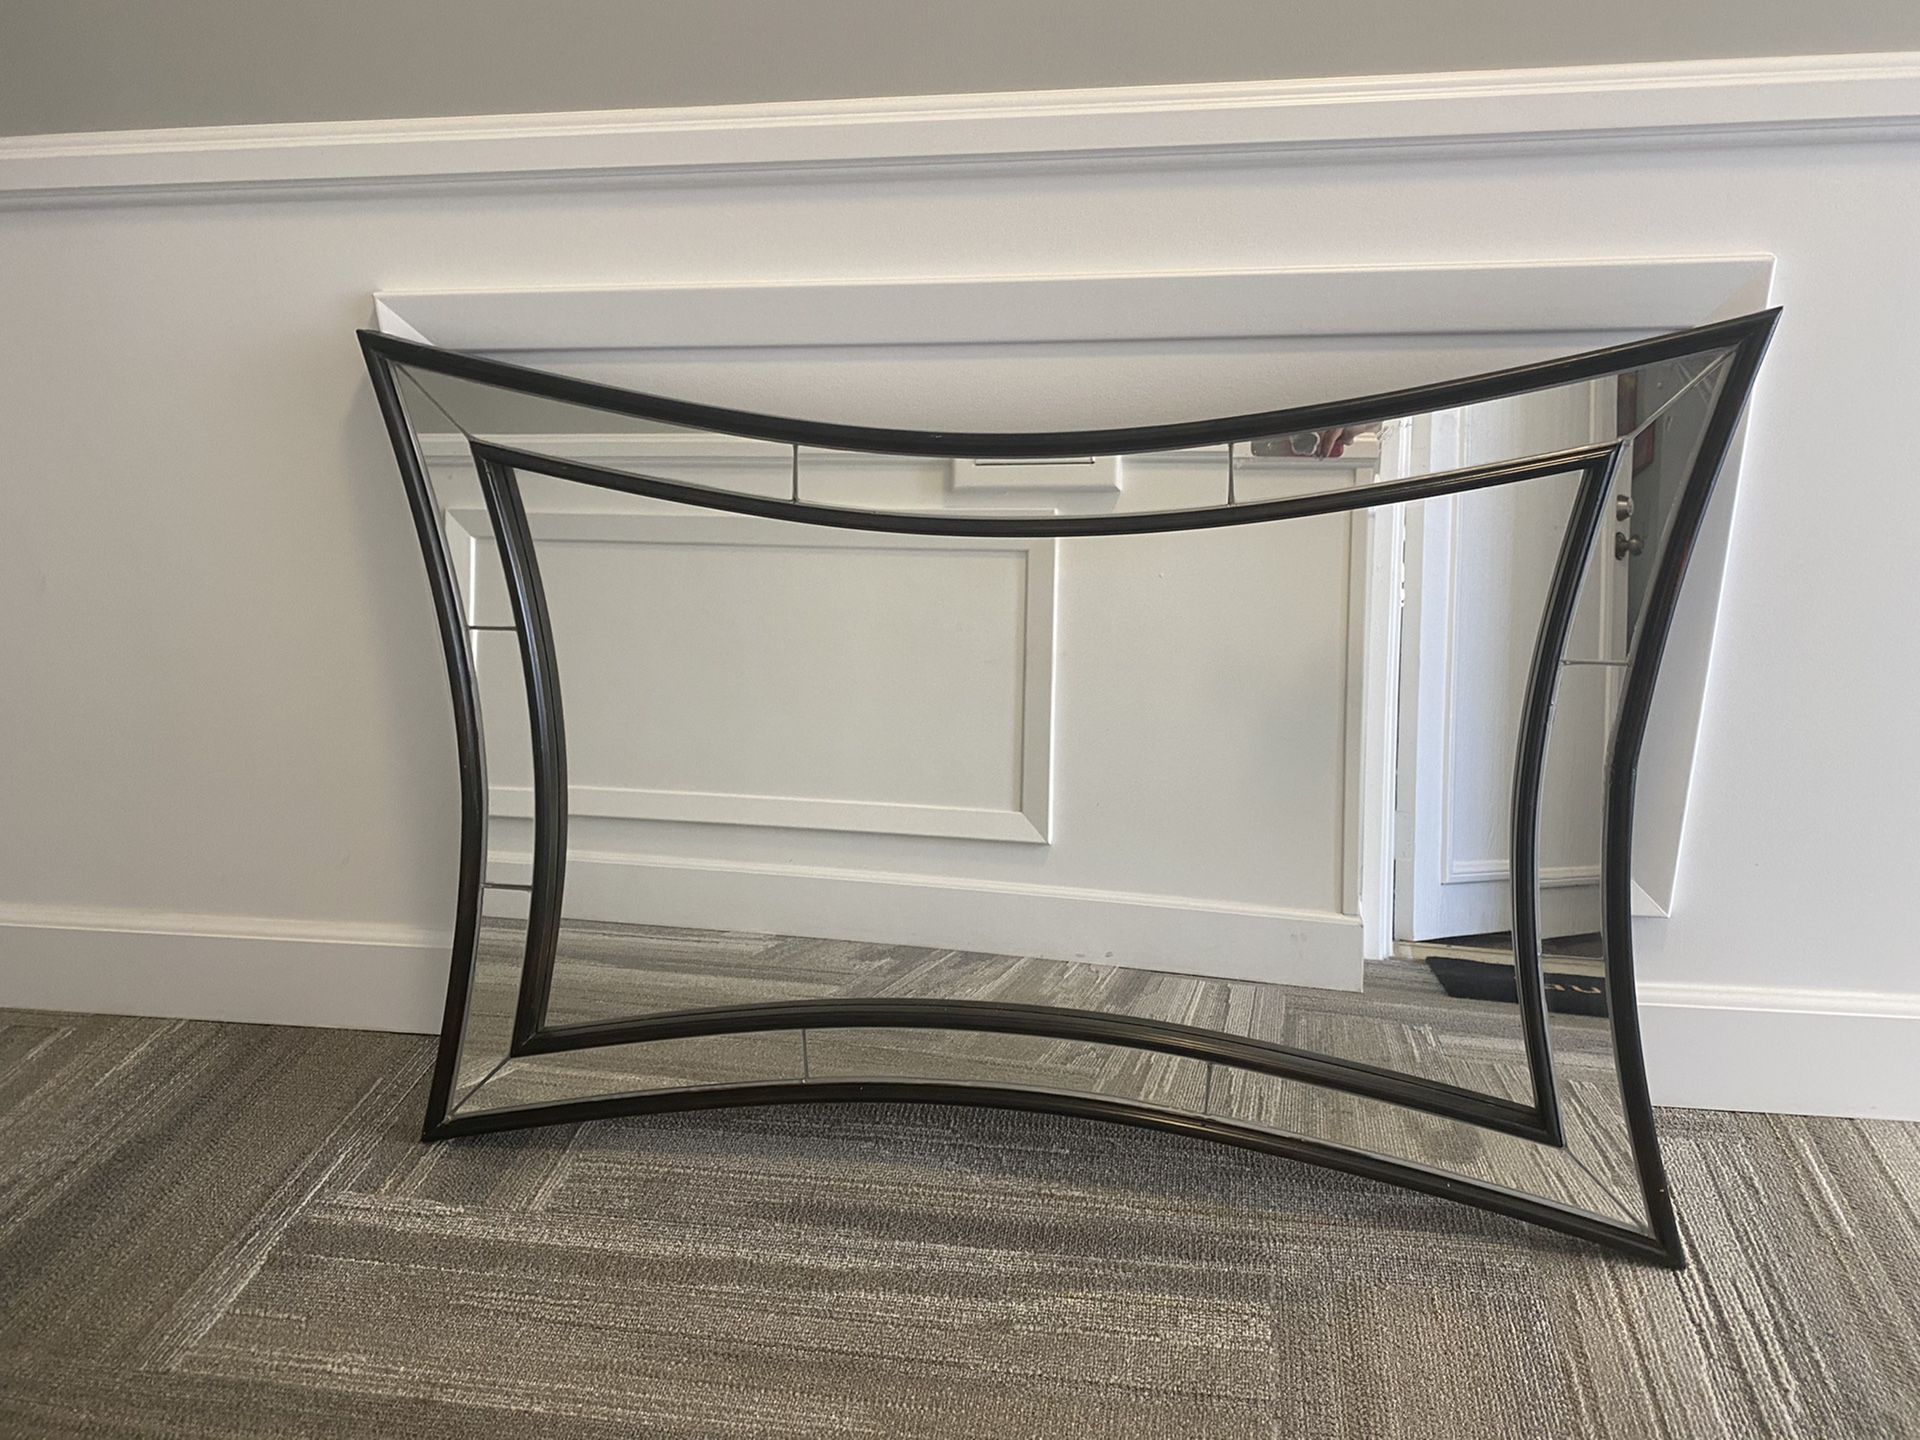 Arched wall mirror with black wood framing